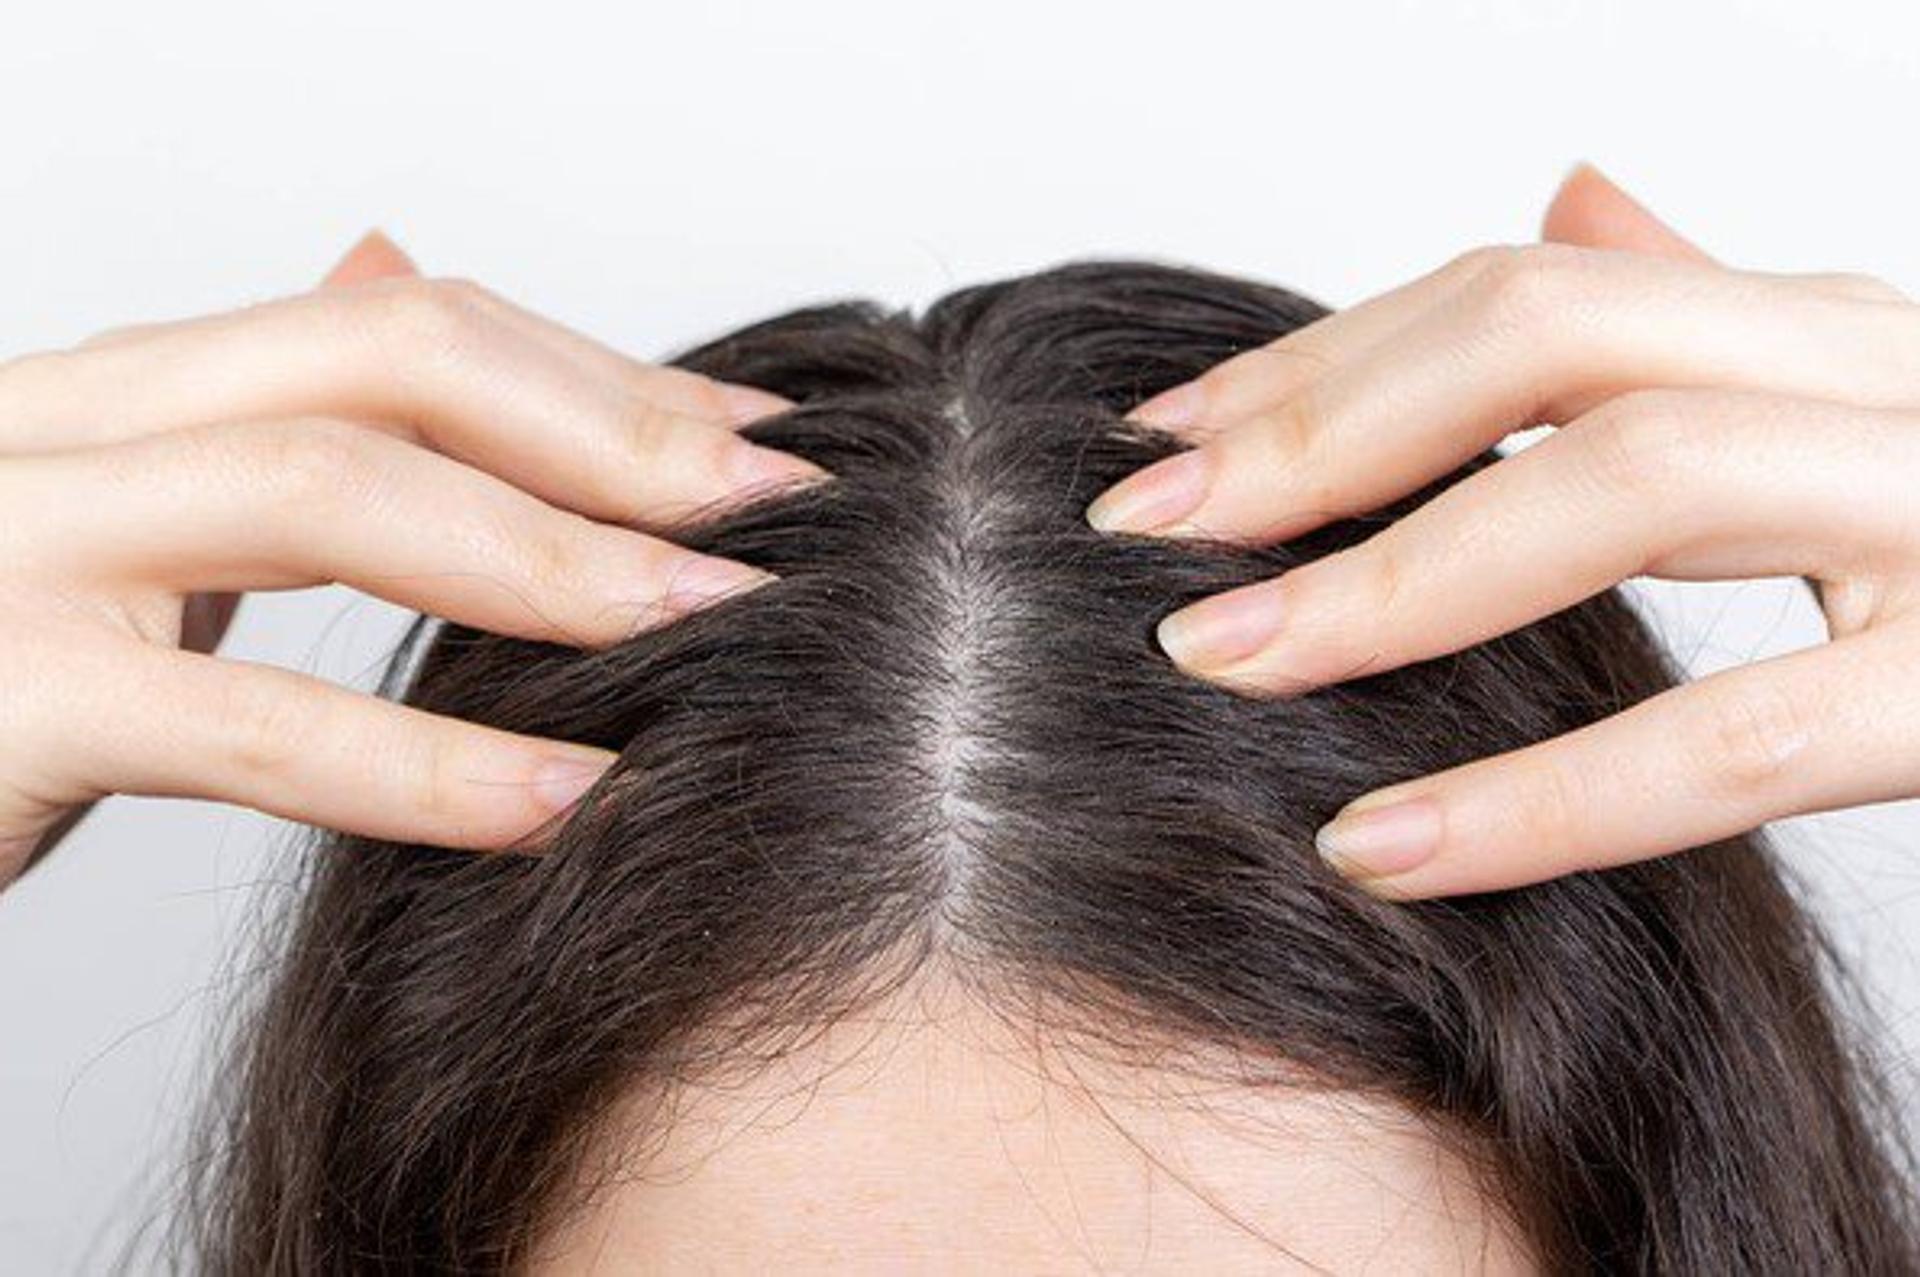 Photo of just the top of a woman's head and scalp